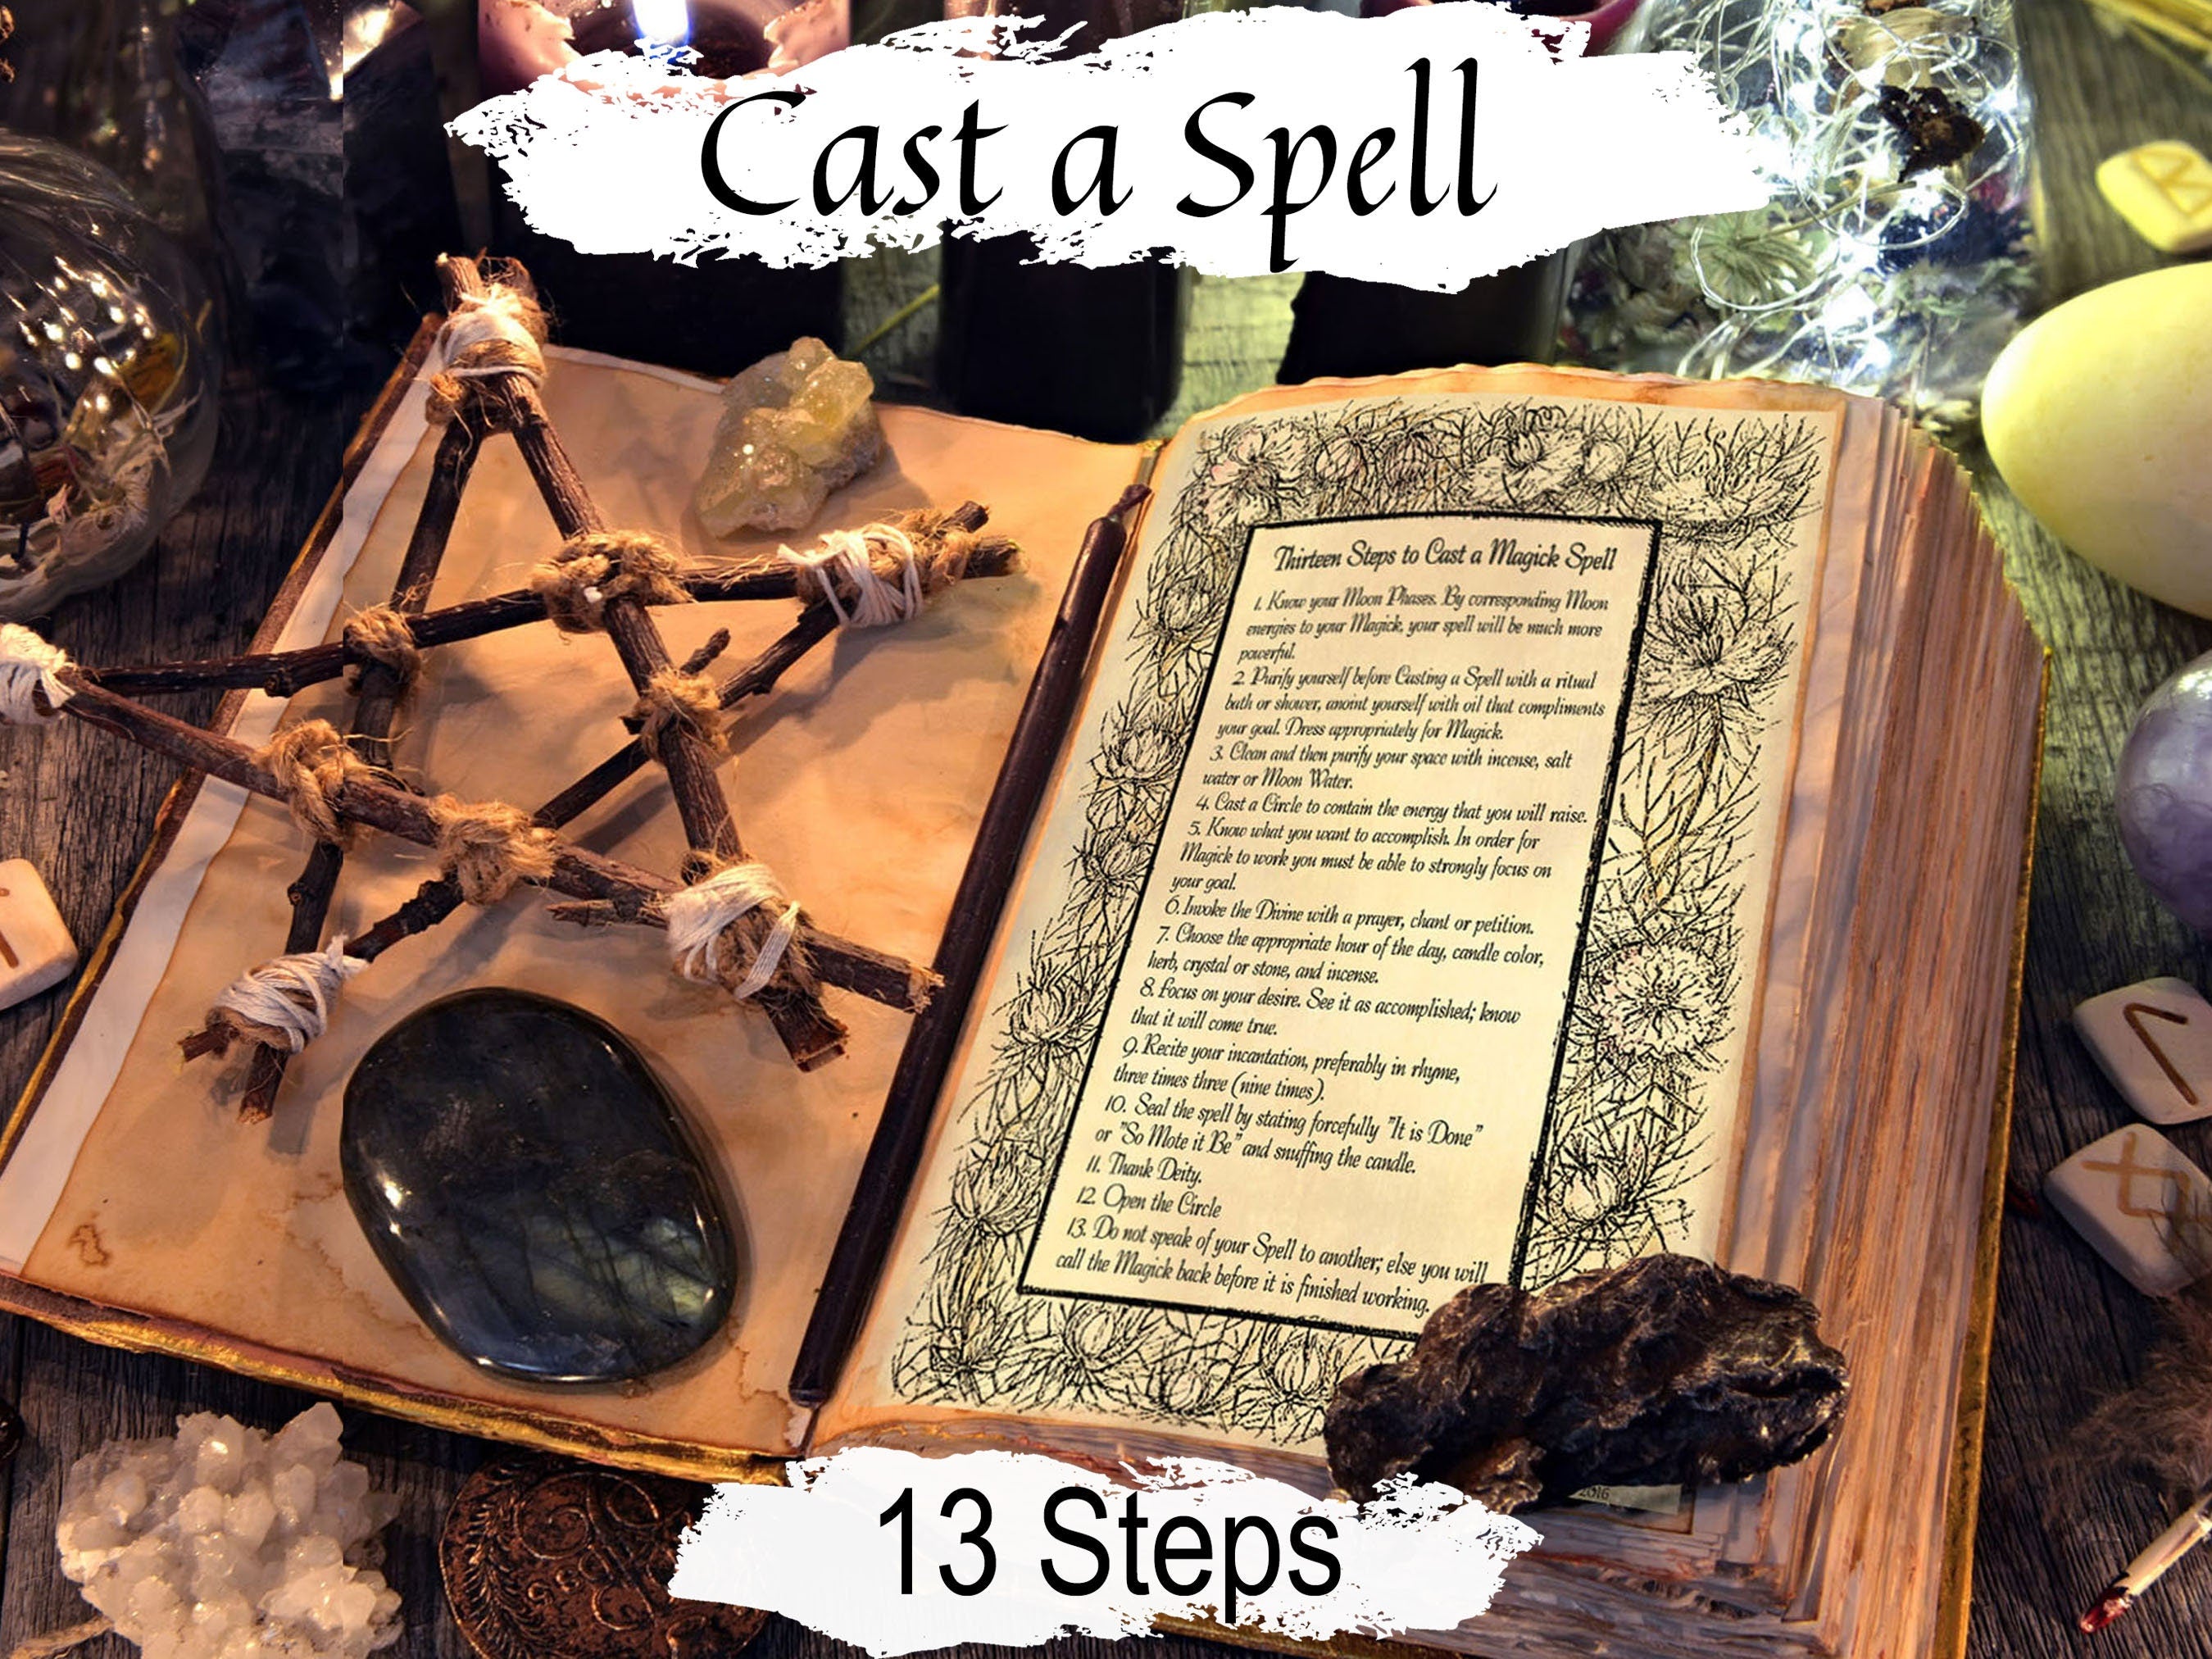 CAST a SPELL 13 STEPS, Complete Guide, Real Magic, Easy for Beginners, Printable Book of Shadows, Wicca Witchcraft, Write your own Spell - Morgana Magick Spell